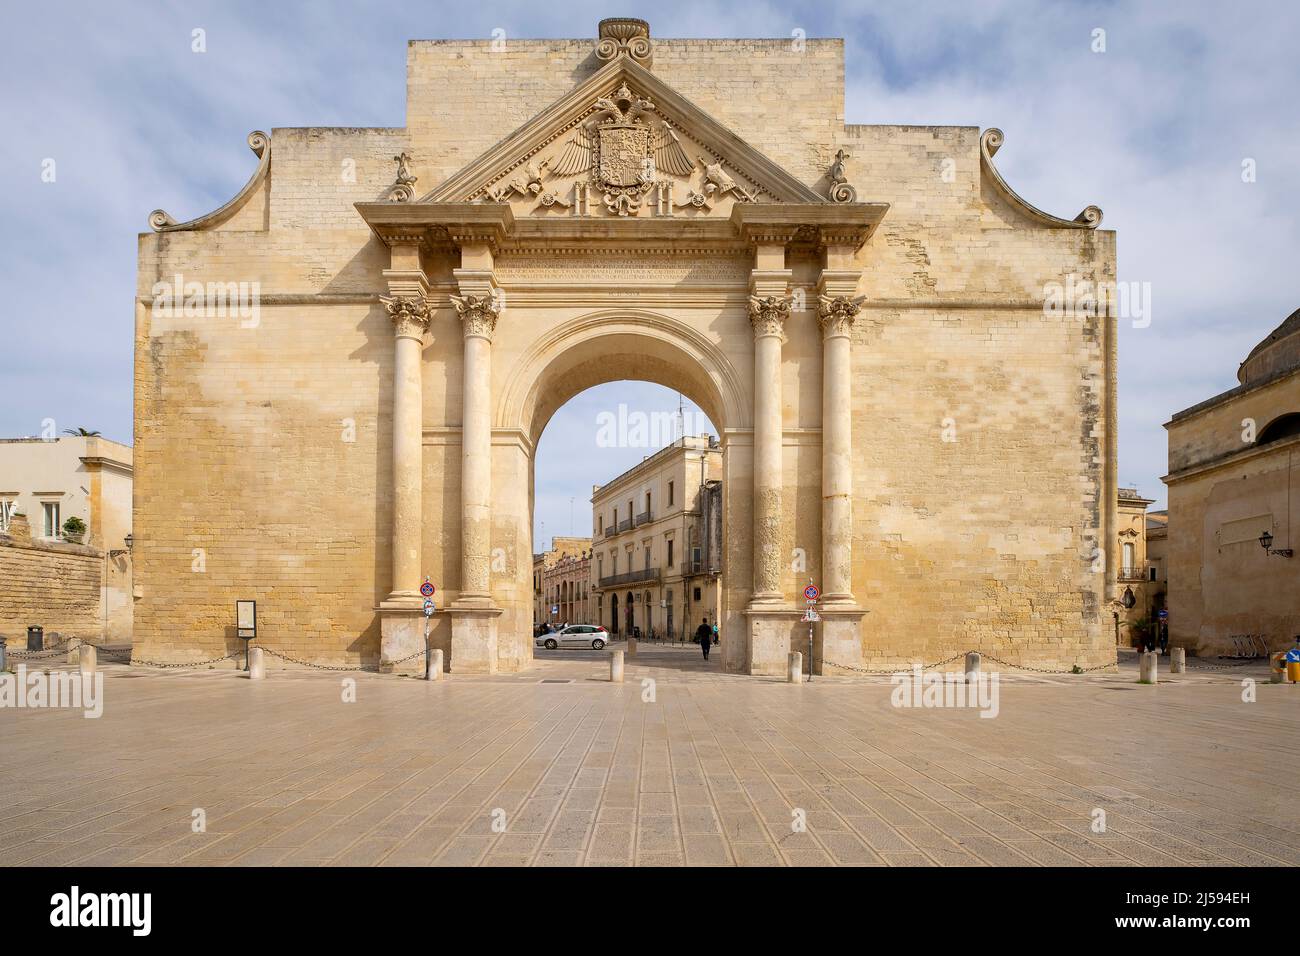 Porta Napoli is a triumphal arch city gate of Lecce, which marks the entrance to the historic center of the city together with the other two existing Stock Photo